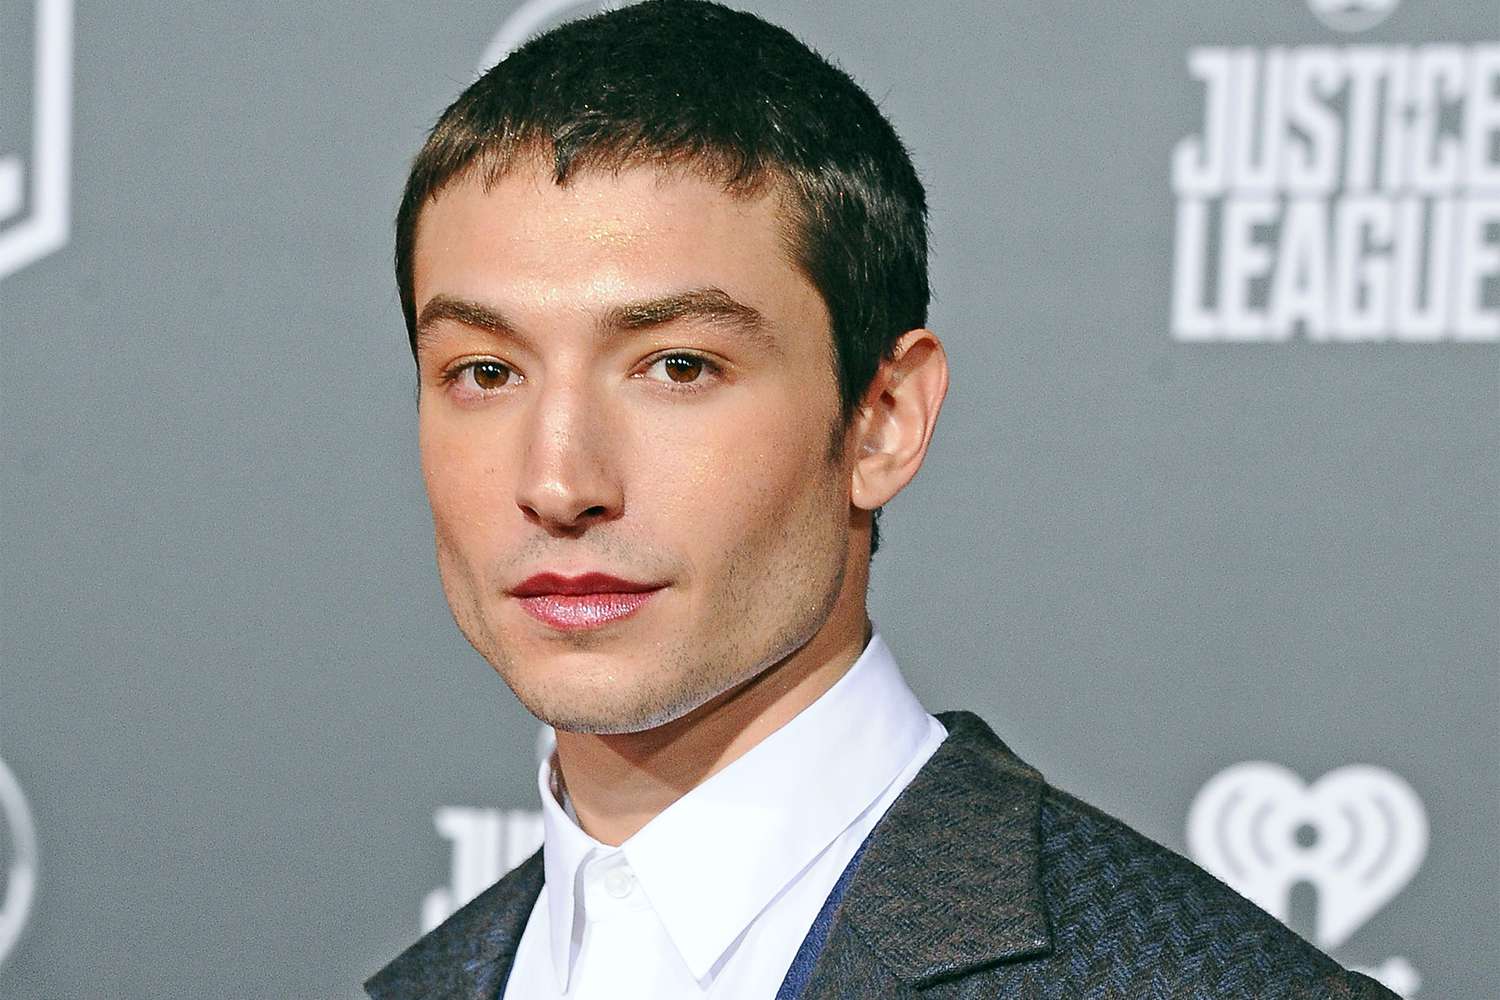 HOLLYWOOD, CA - NOVEMBER 13: Actor Ezra Miller attends the Los Angeles Premiere of Warner Bros. Pictures' "Justice League" at Dolby Theatre on November 13, 2017 in Hollywood, California. (Photo by Jon Kopaloff/FilmMagic)